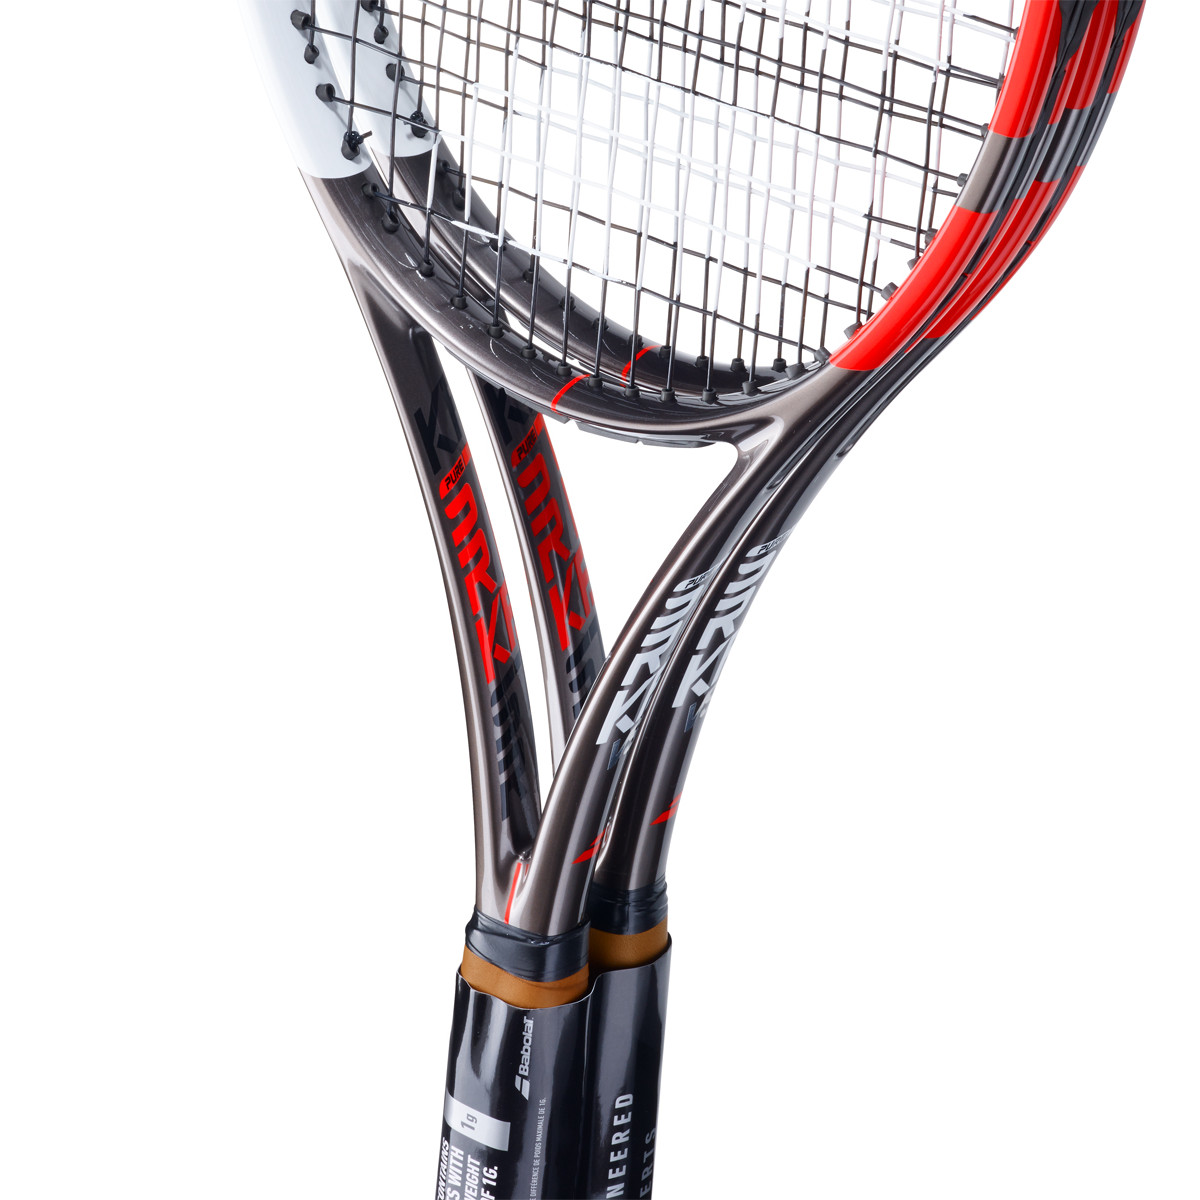 PACK OF 2 BABOLAT PURE STRIKE VS RACQUETS (310 GR) - BABOLAT 